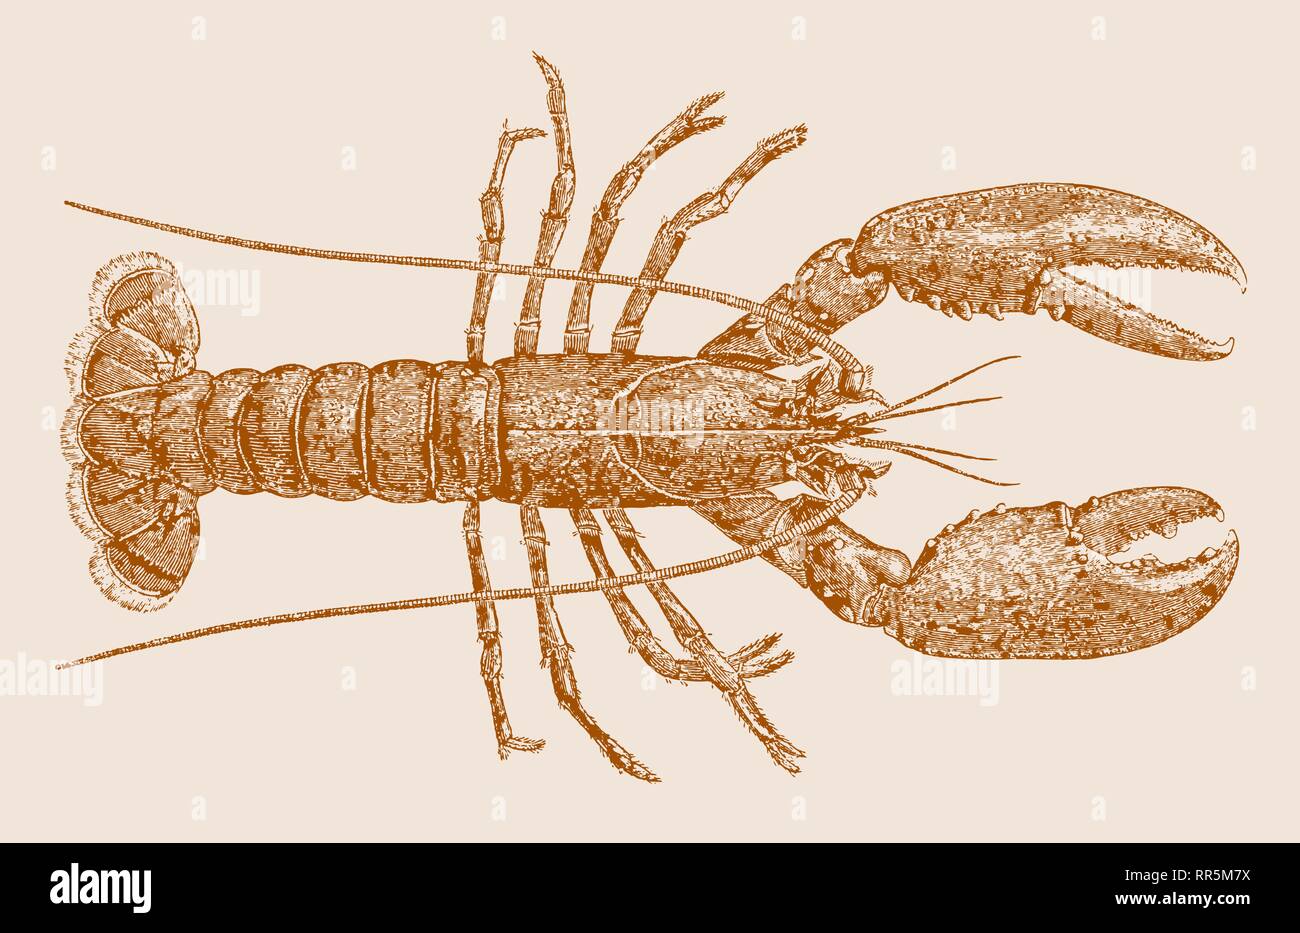 Norway lobster or dublin bay prawn (nephrops norvegicus) in top view. Illustration after a historic etching or lithography from the 19th century Stock Vector